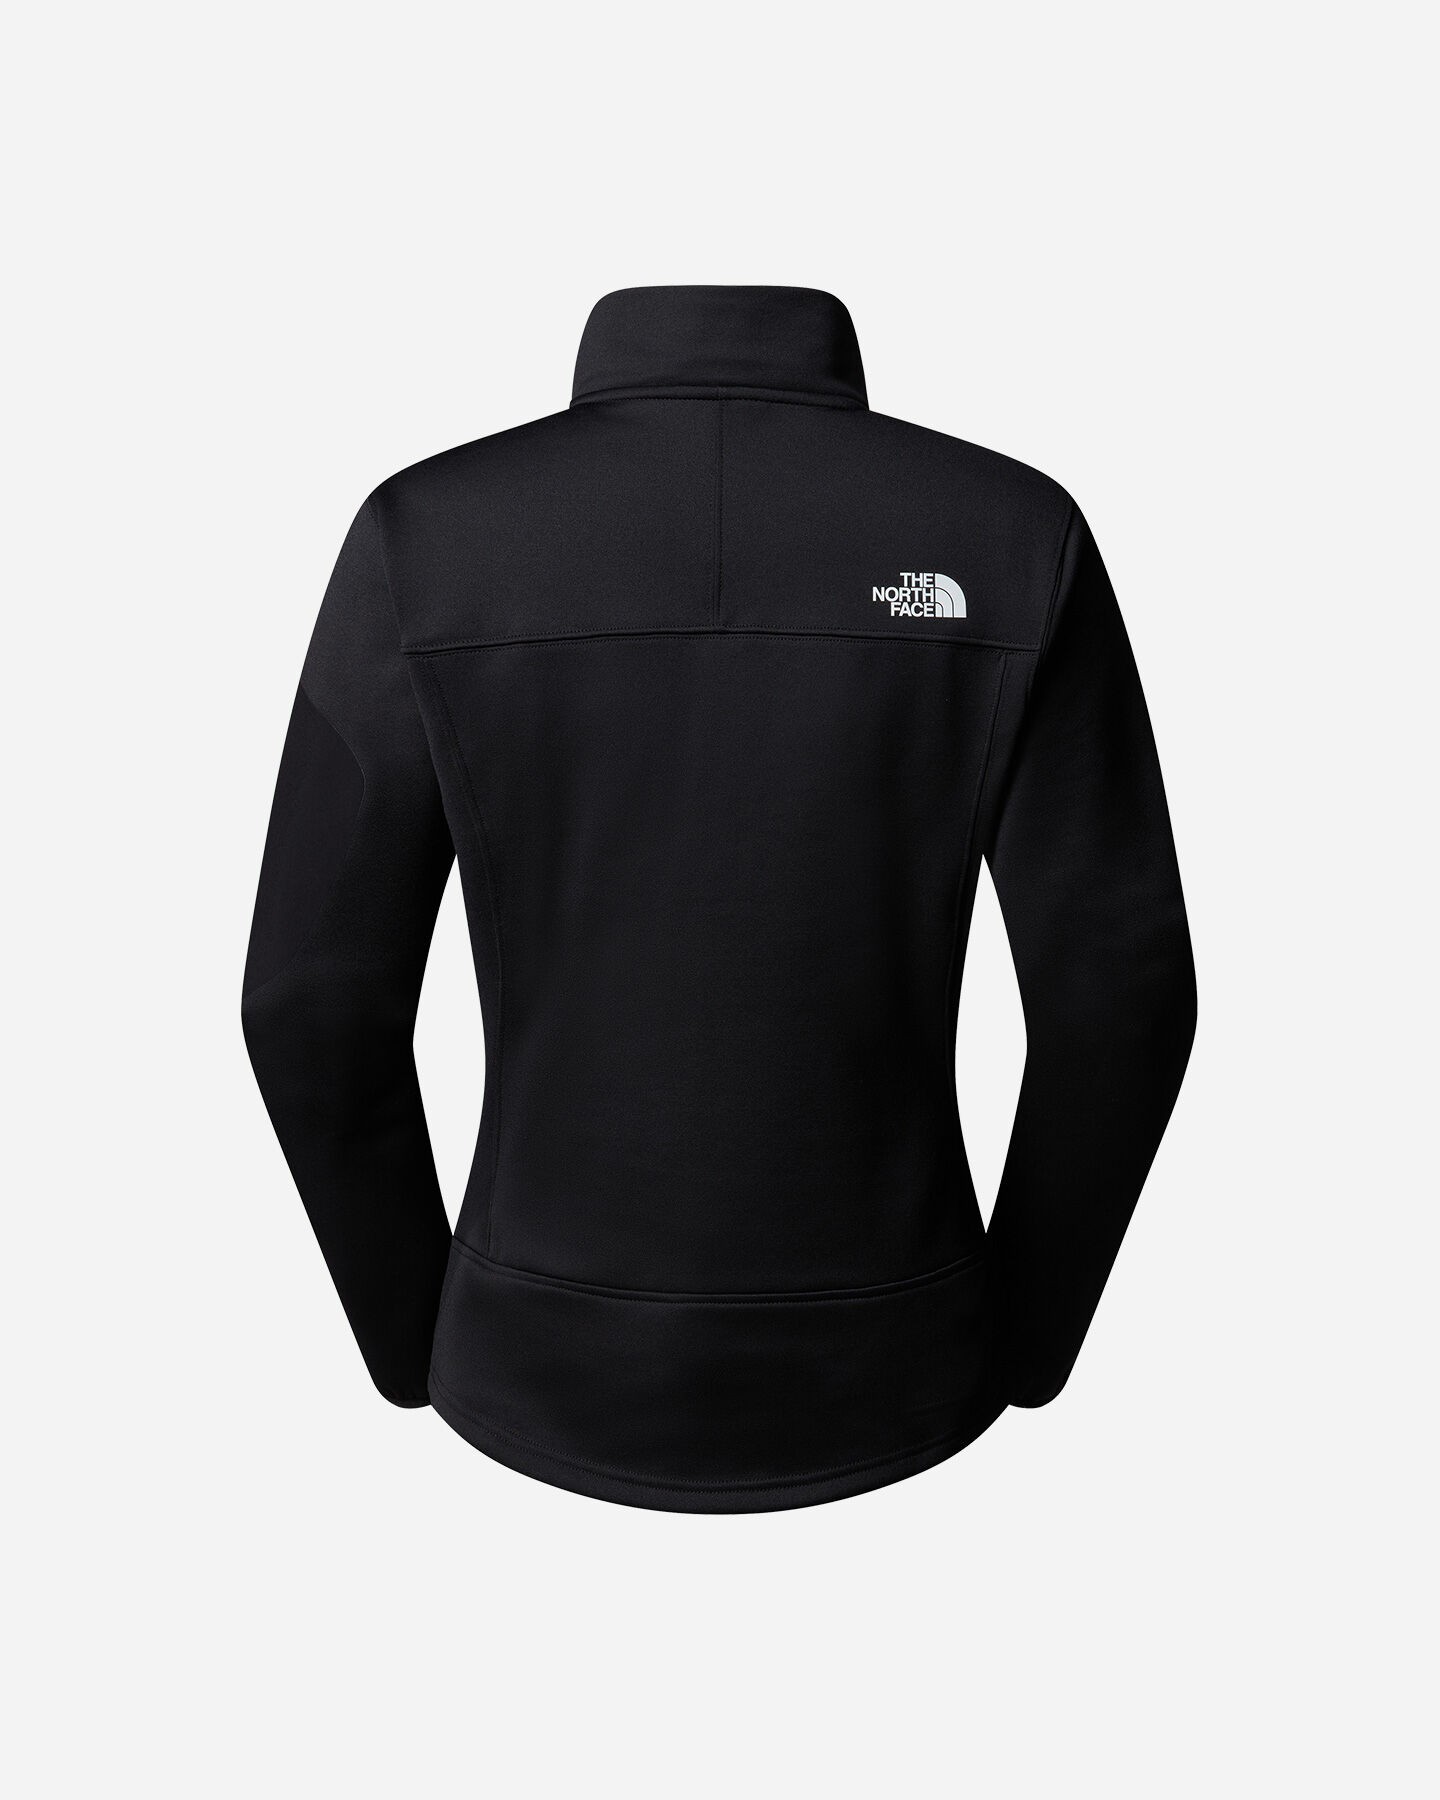  Pile THE NORTH FACE MISTYESCAPE W S5650894|KX7|XS scatto 1